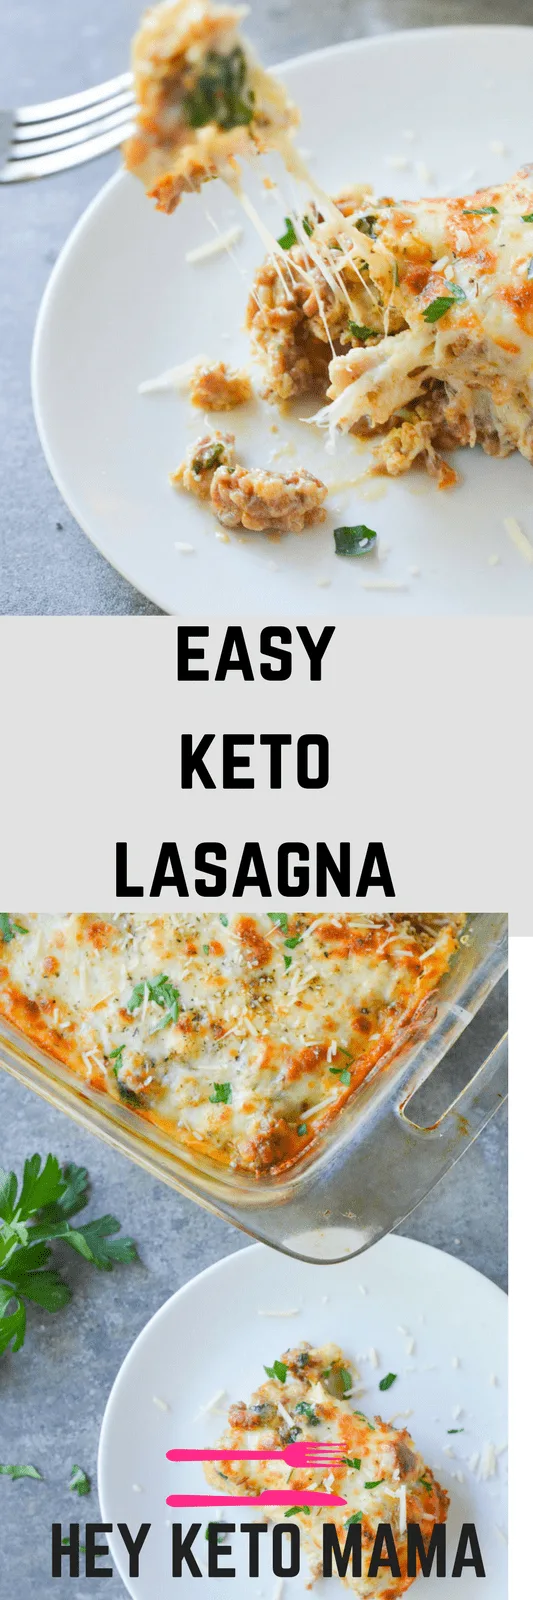 This easy keto lasagna will quickly become one of your new favorite meals! It's delicious, nutrient rich, and layers easily! | heyketomama.com